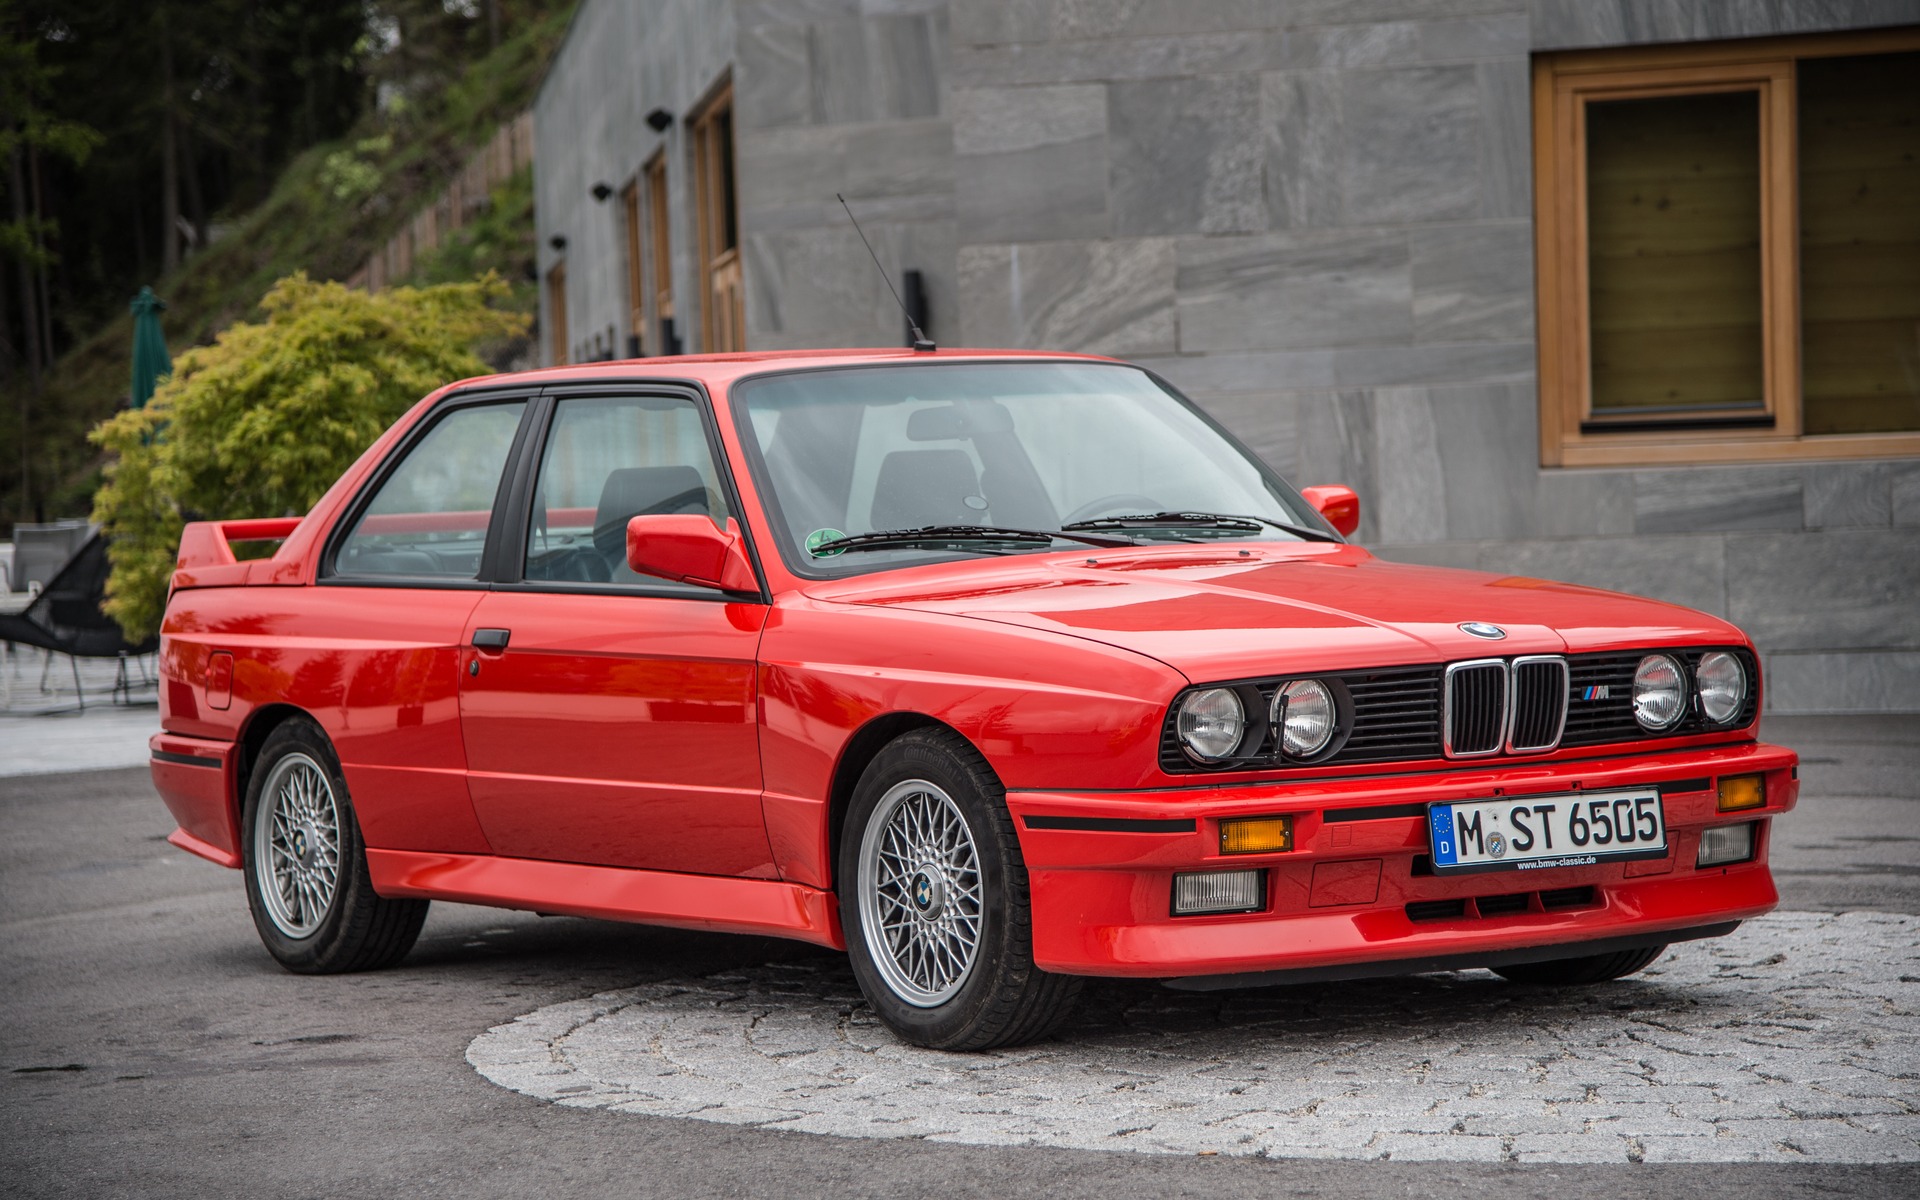 1986 BMW E30 M3: This is the most desirable and purest of M3s. 